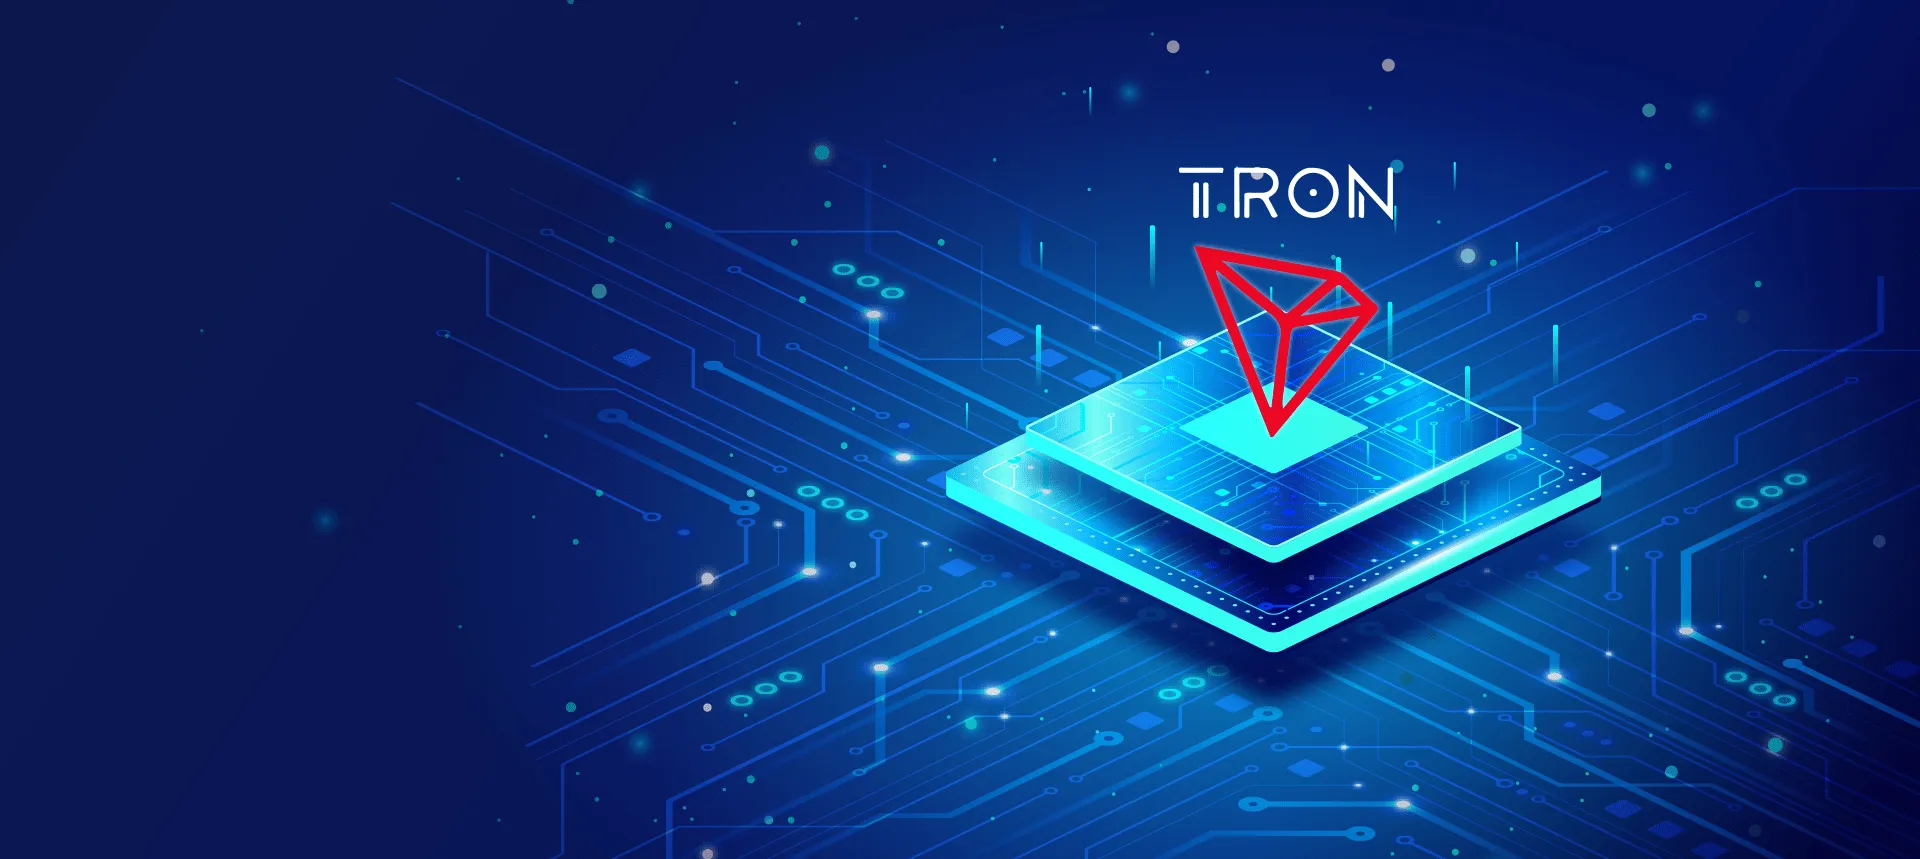 Use Cases of TRON/TRC20 in DeFi